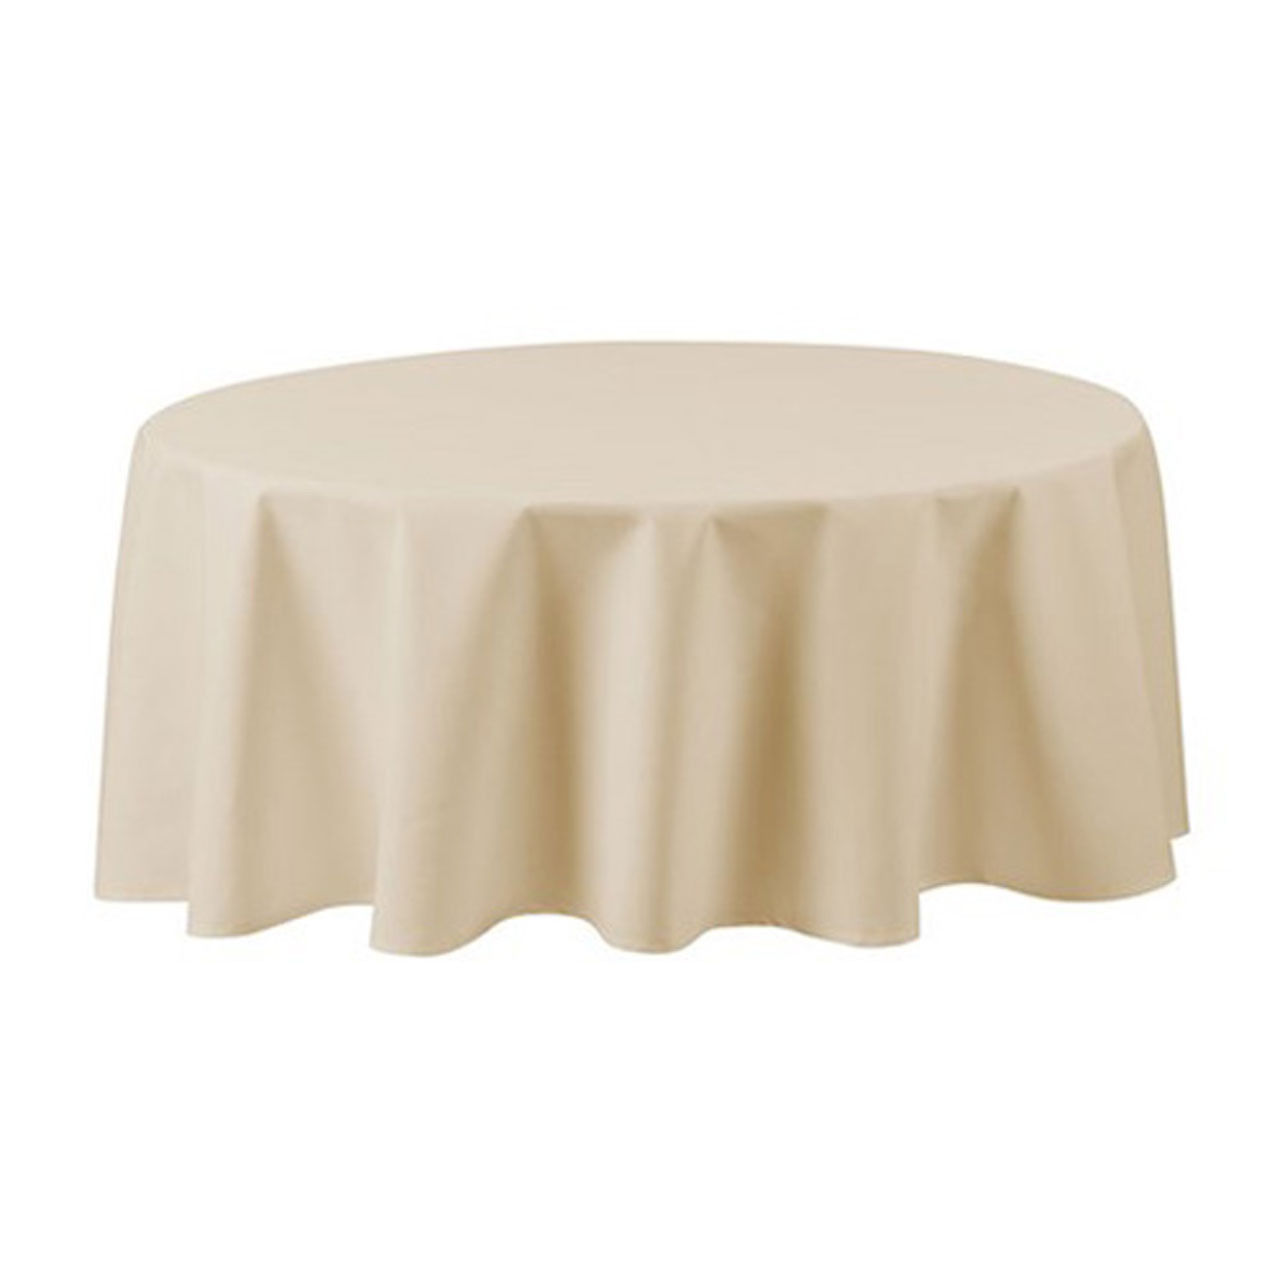 Is the size of the ivory 120 inch round tablecloths suitable?